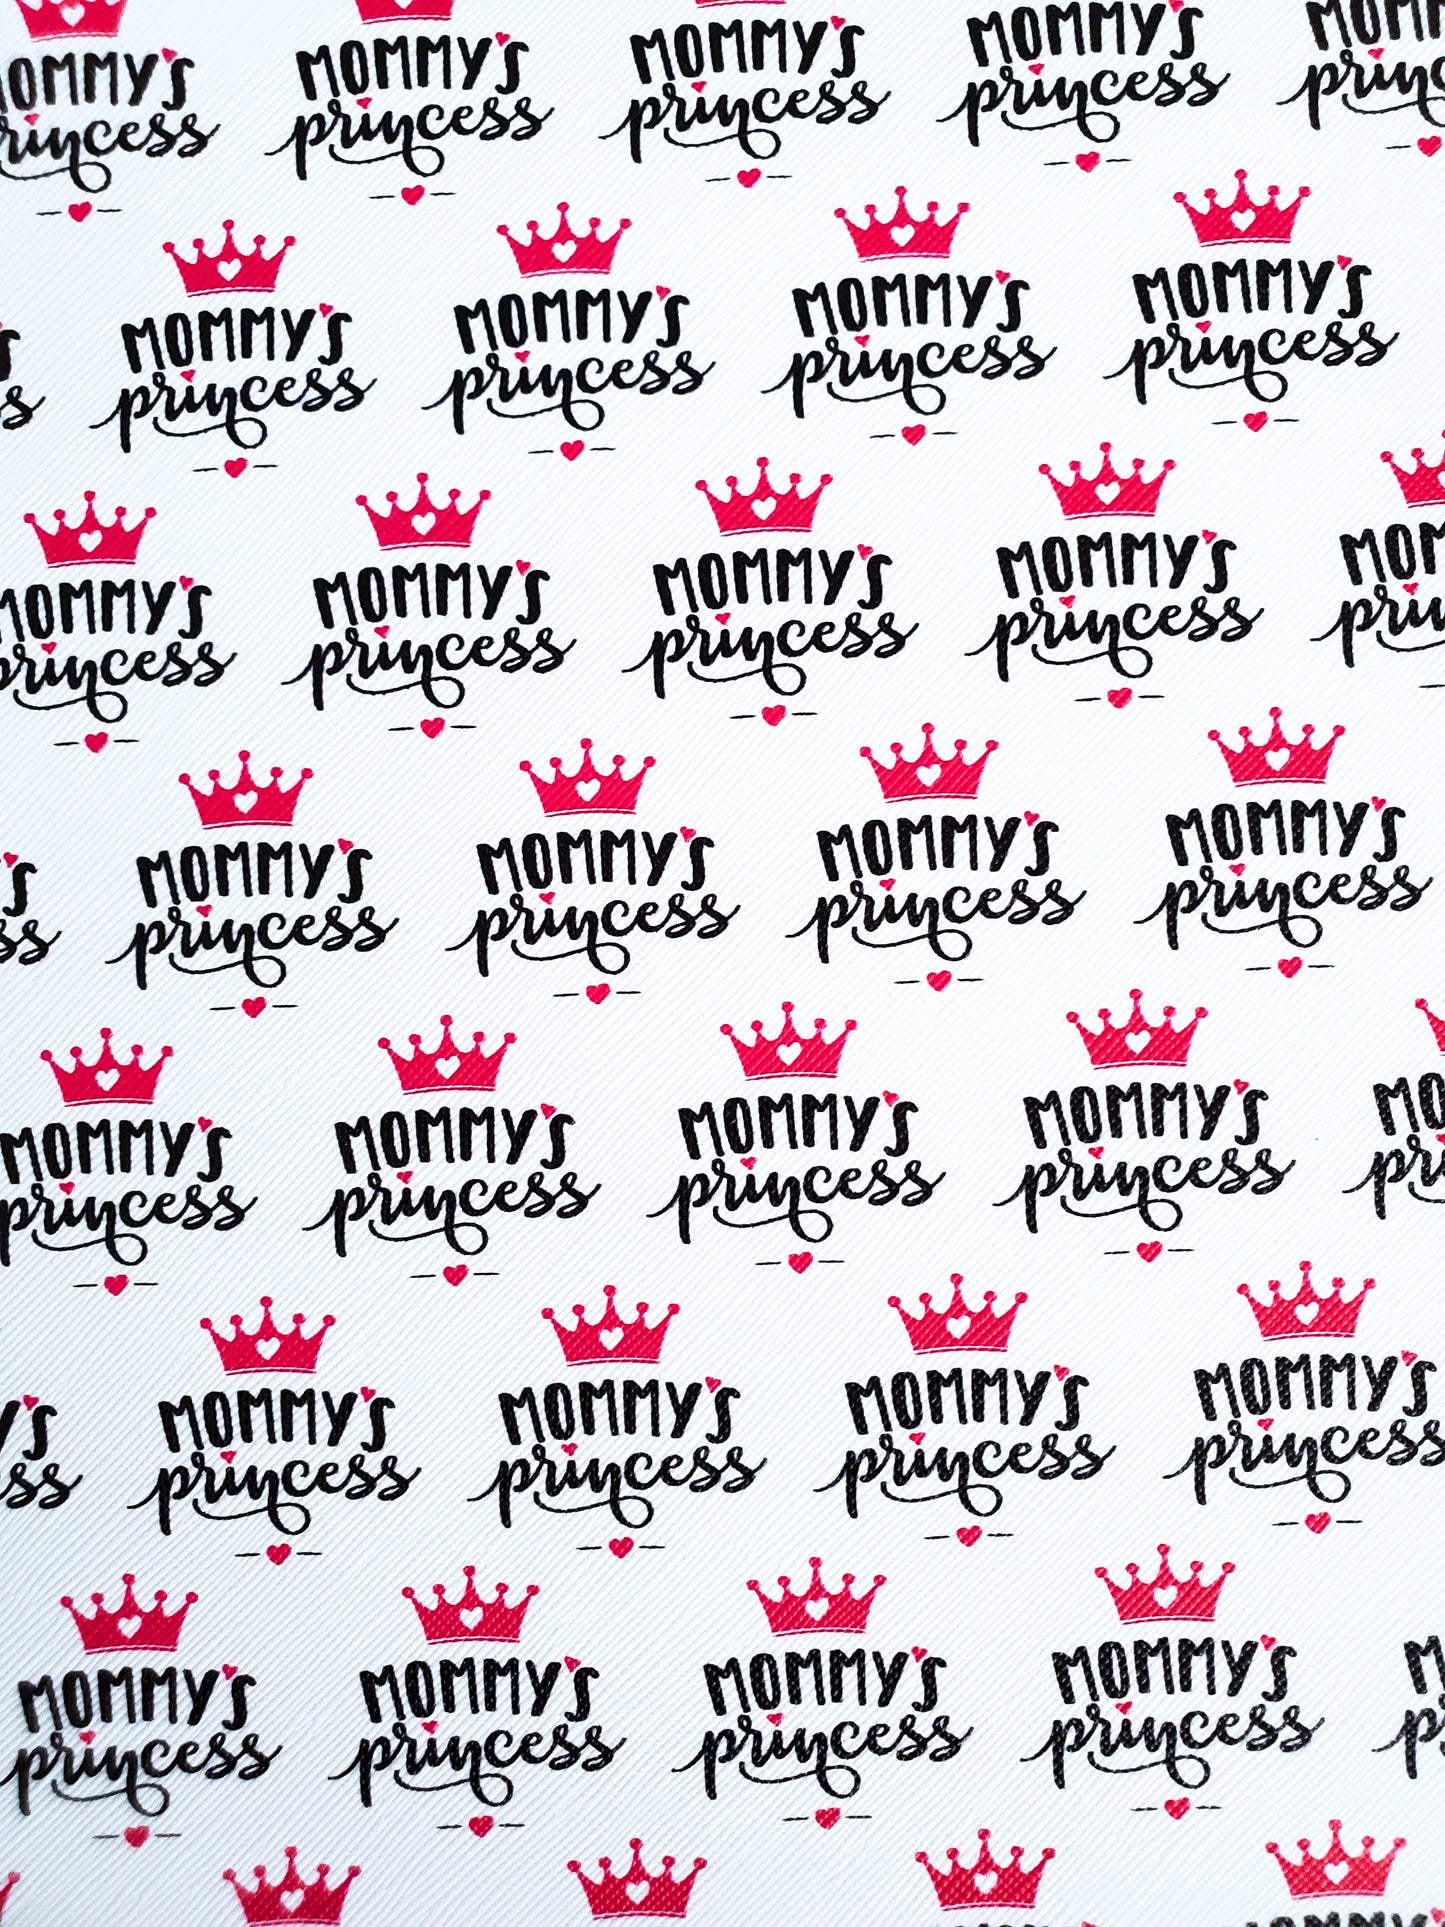 Mommy's Princess 9x12 faux leather sheet